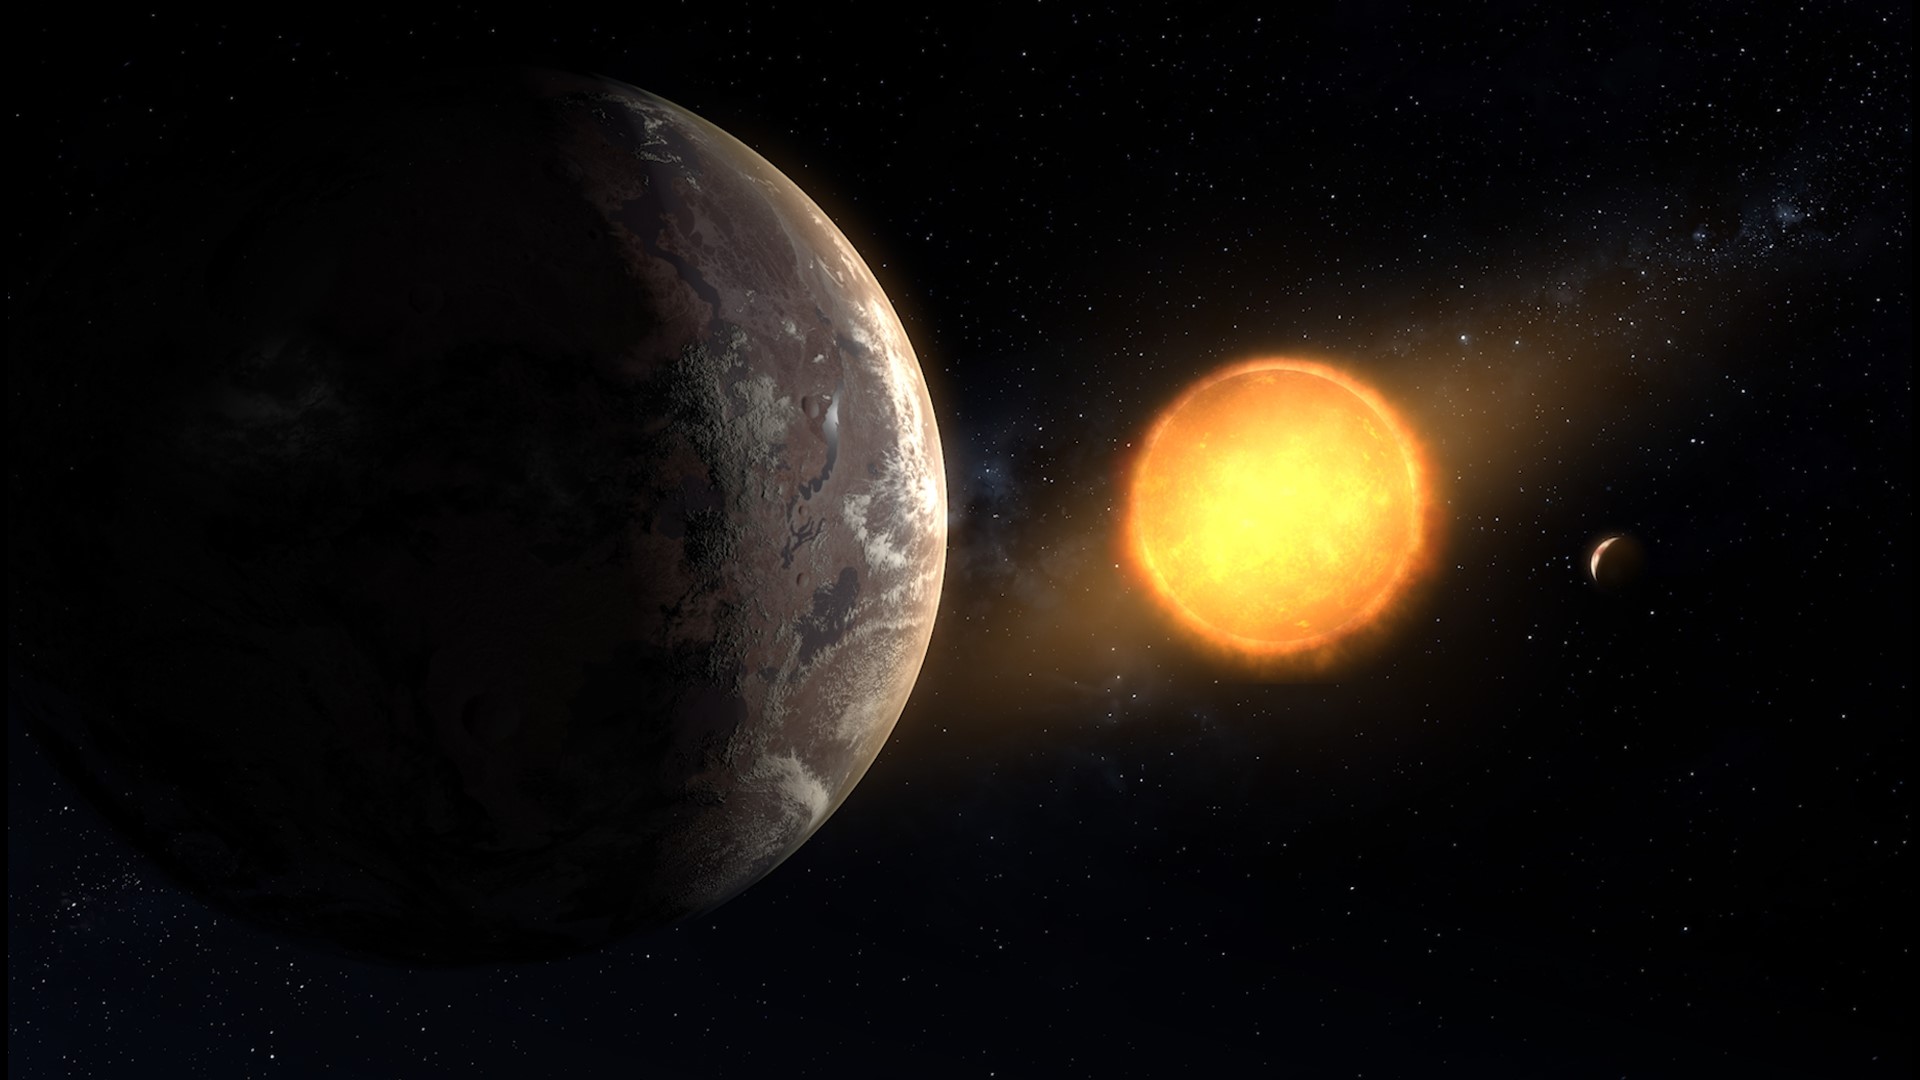 With data from NASA's retired Kepler telescope, an algorithm used to categorize planets mislabeled Kepler-1649c at first. Now, it's the most similar planet to Earth's size and temperature that the observatory's ever found.